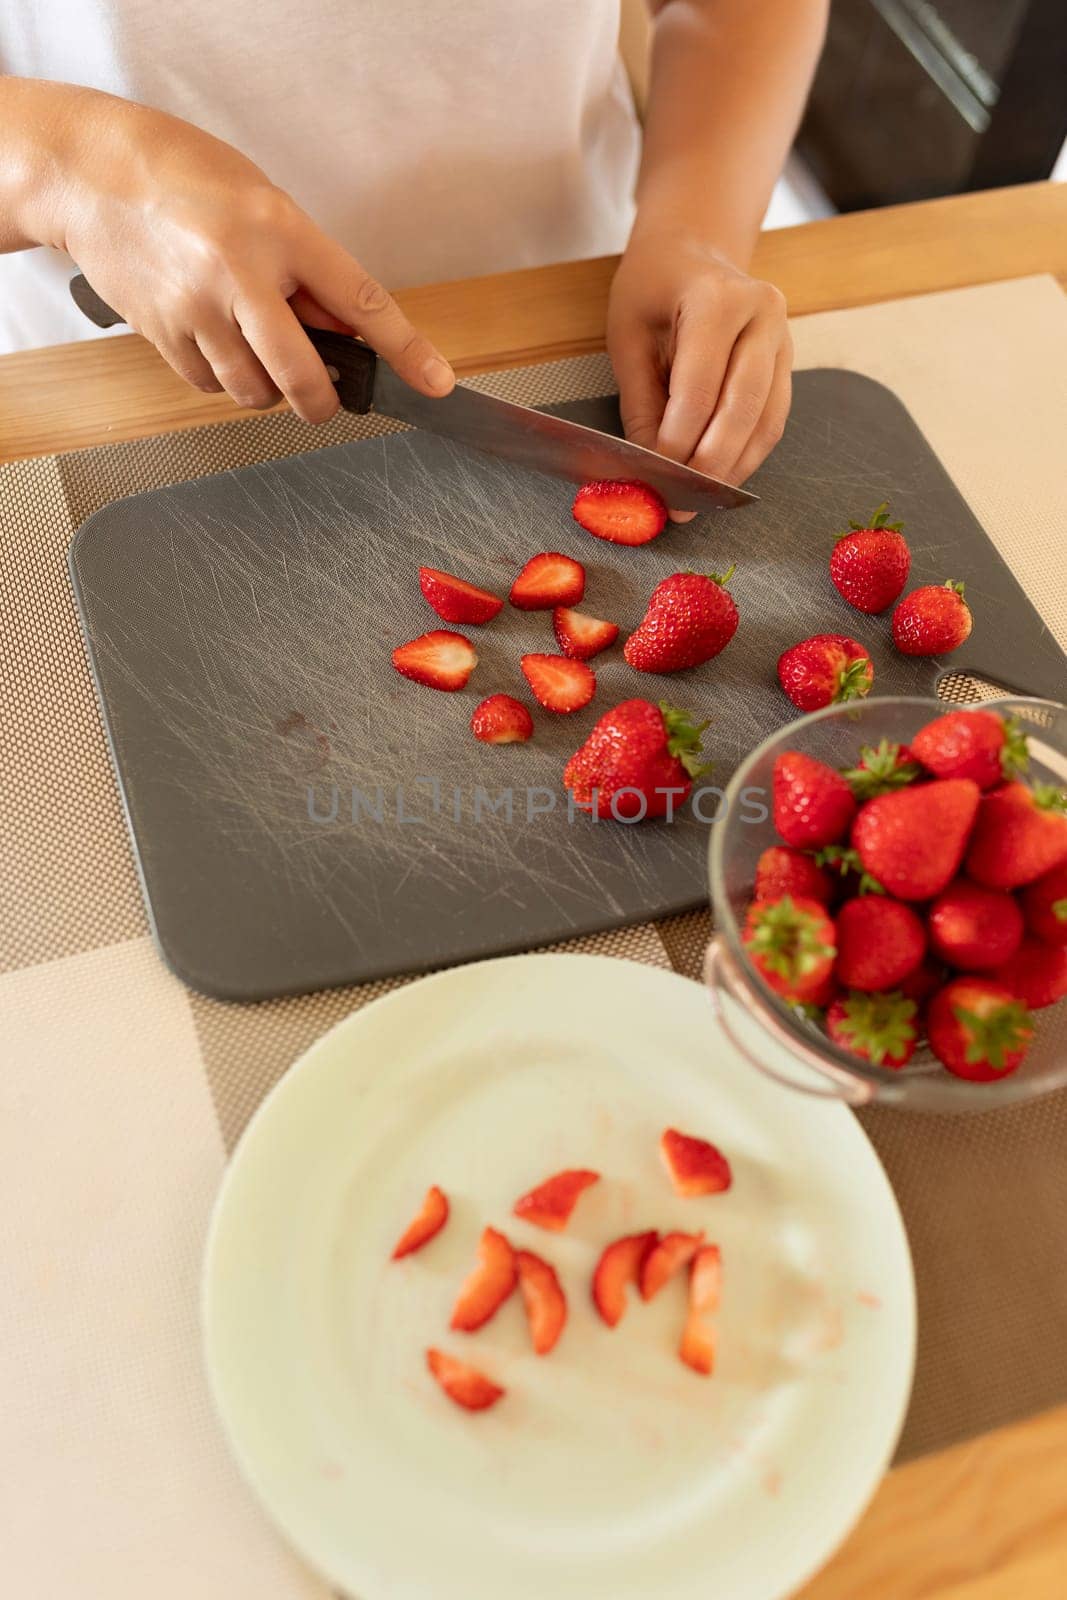 a woman slices strawberries with a knife in the kitchen.